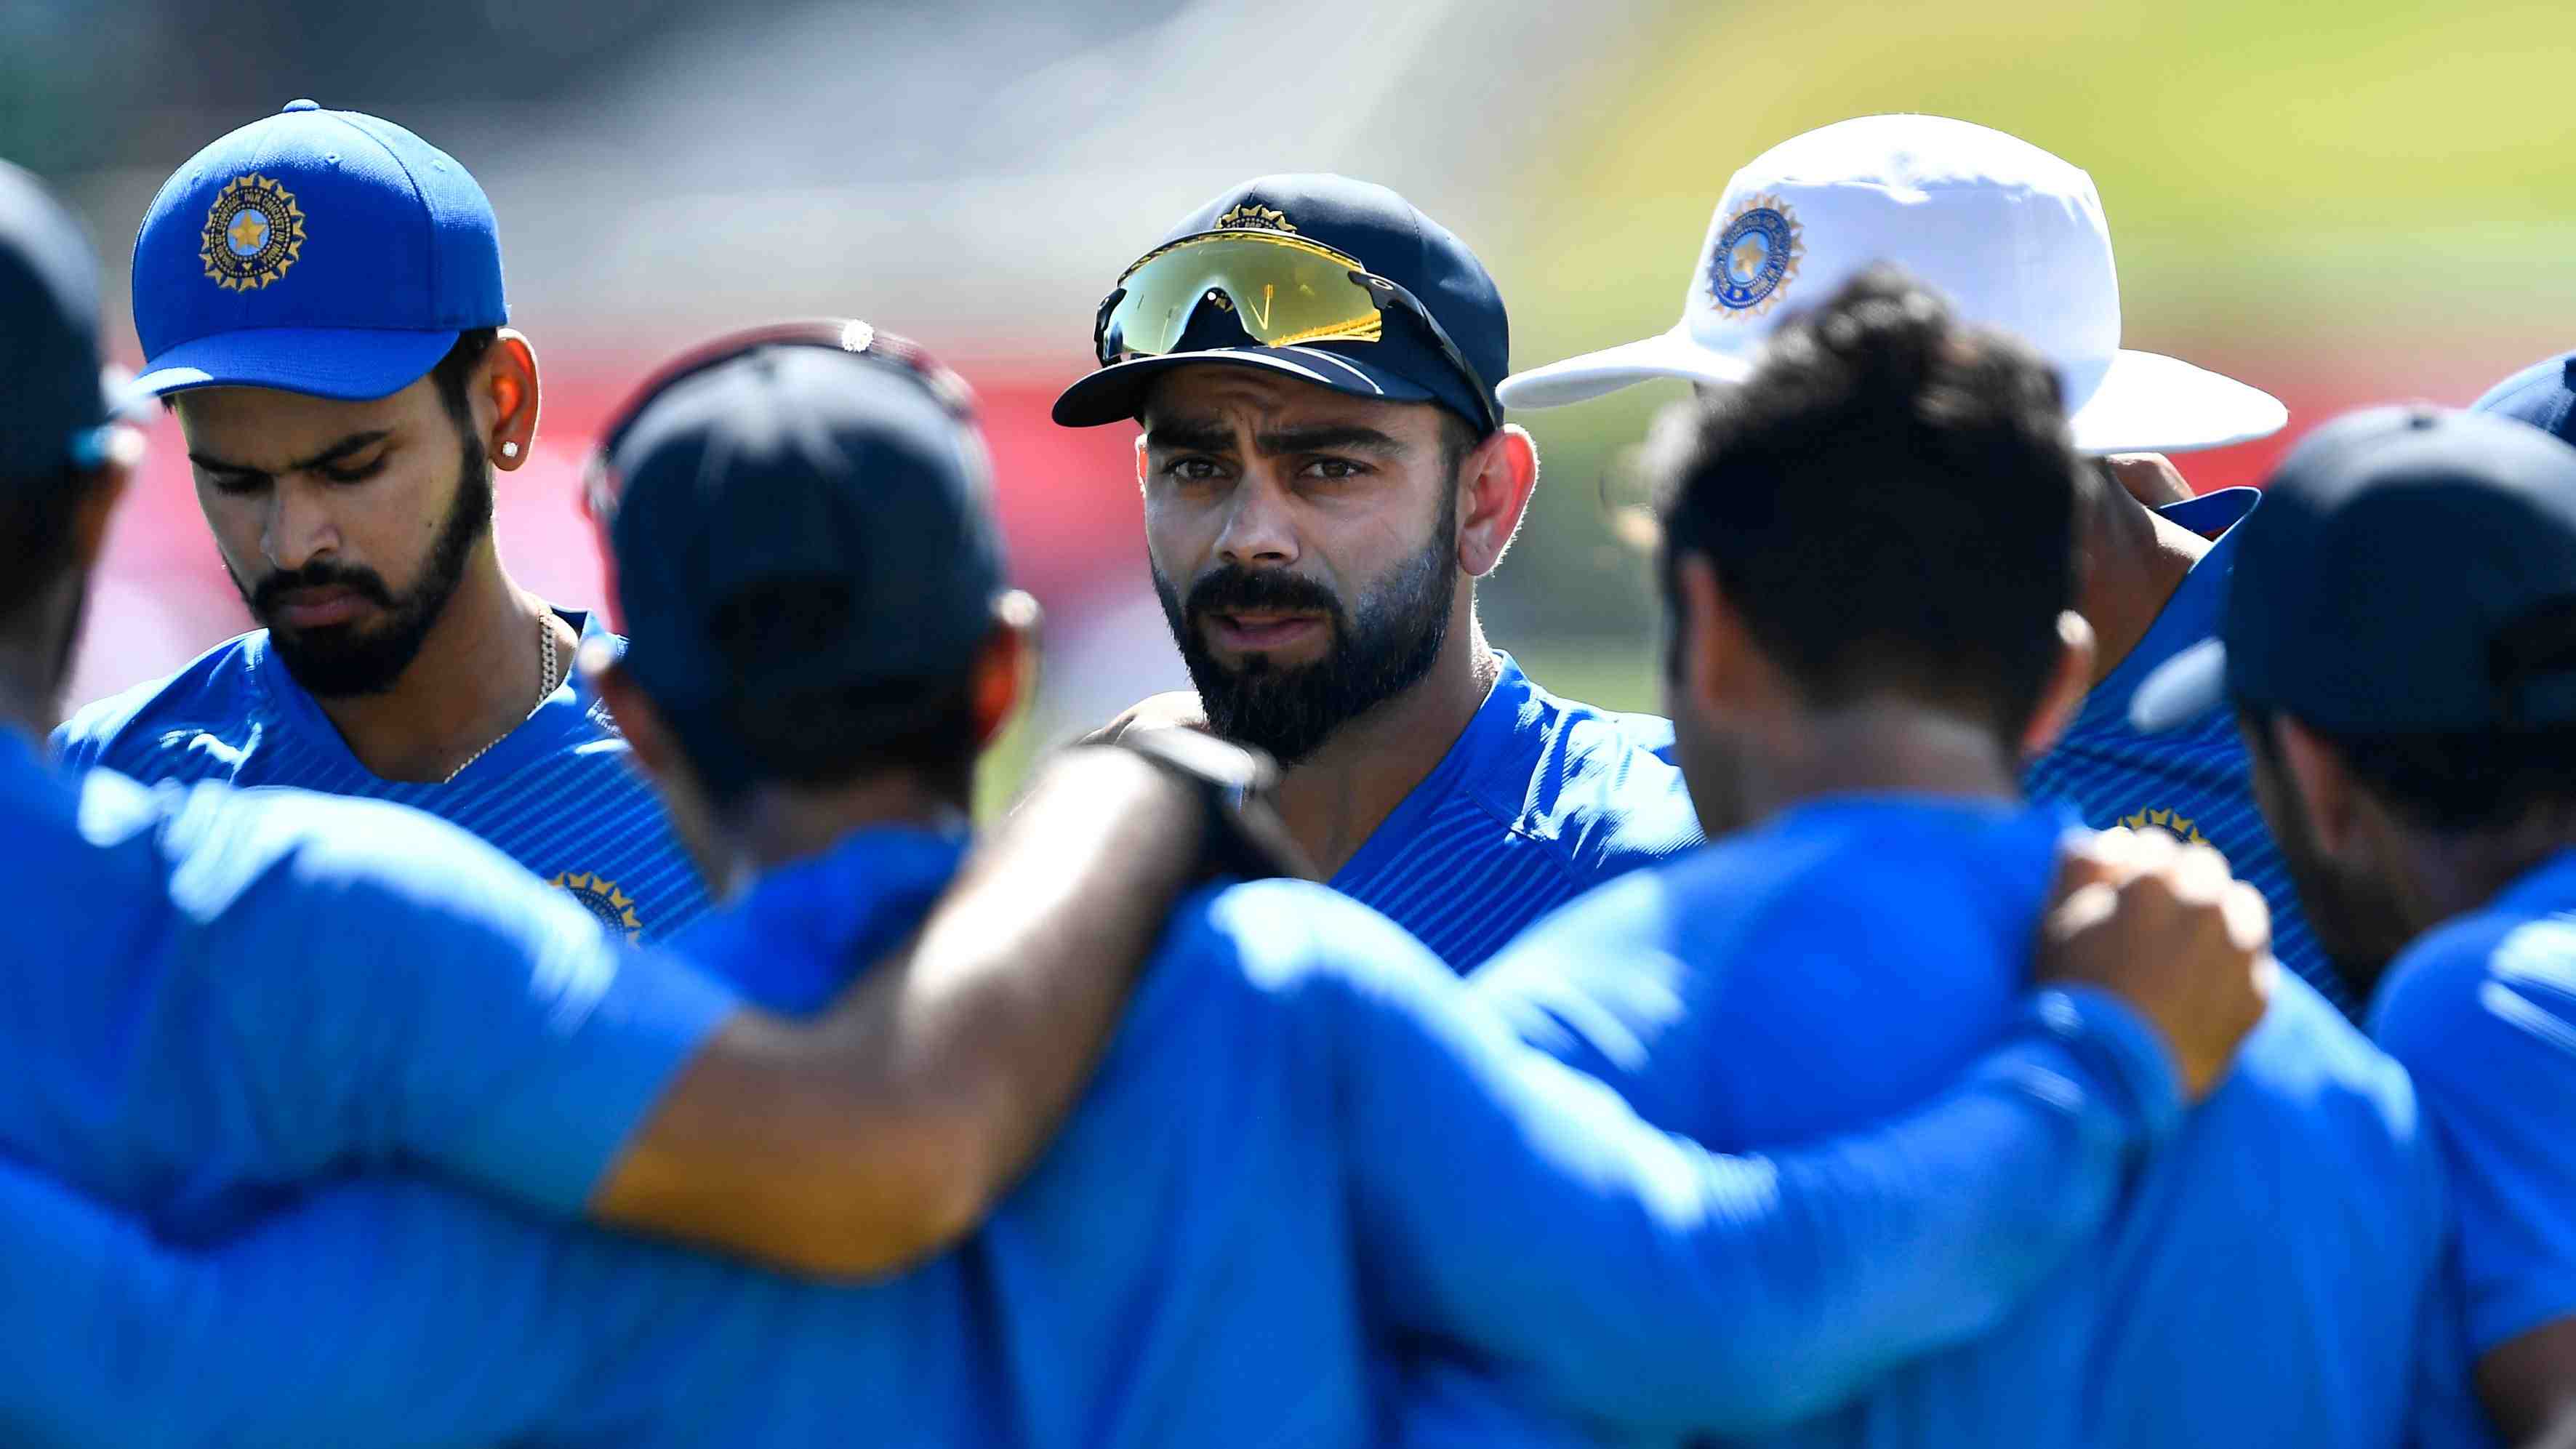 SA vs IND | 3rd Test: There were lapses of concentration from us in key moments, says Kohli 